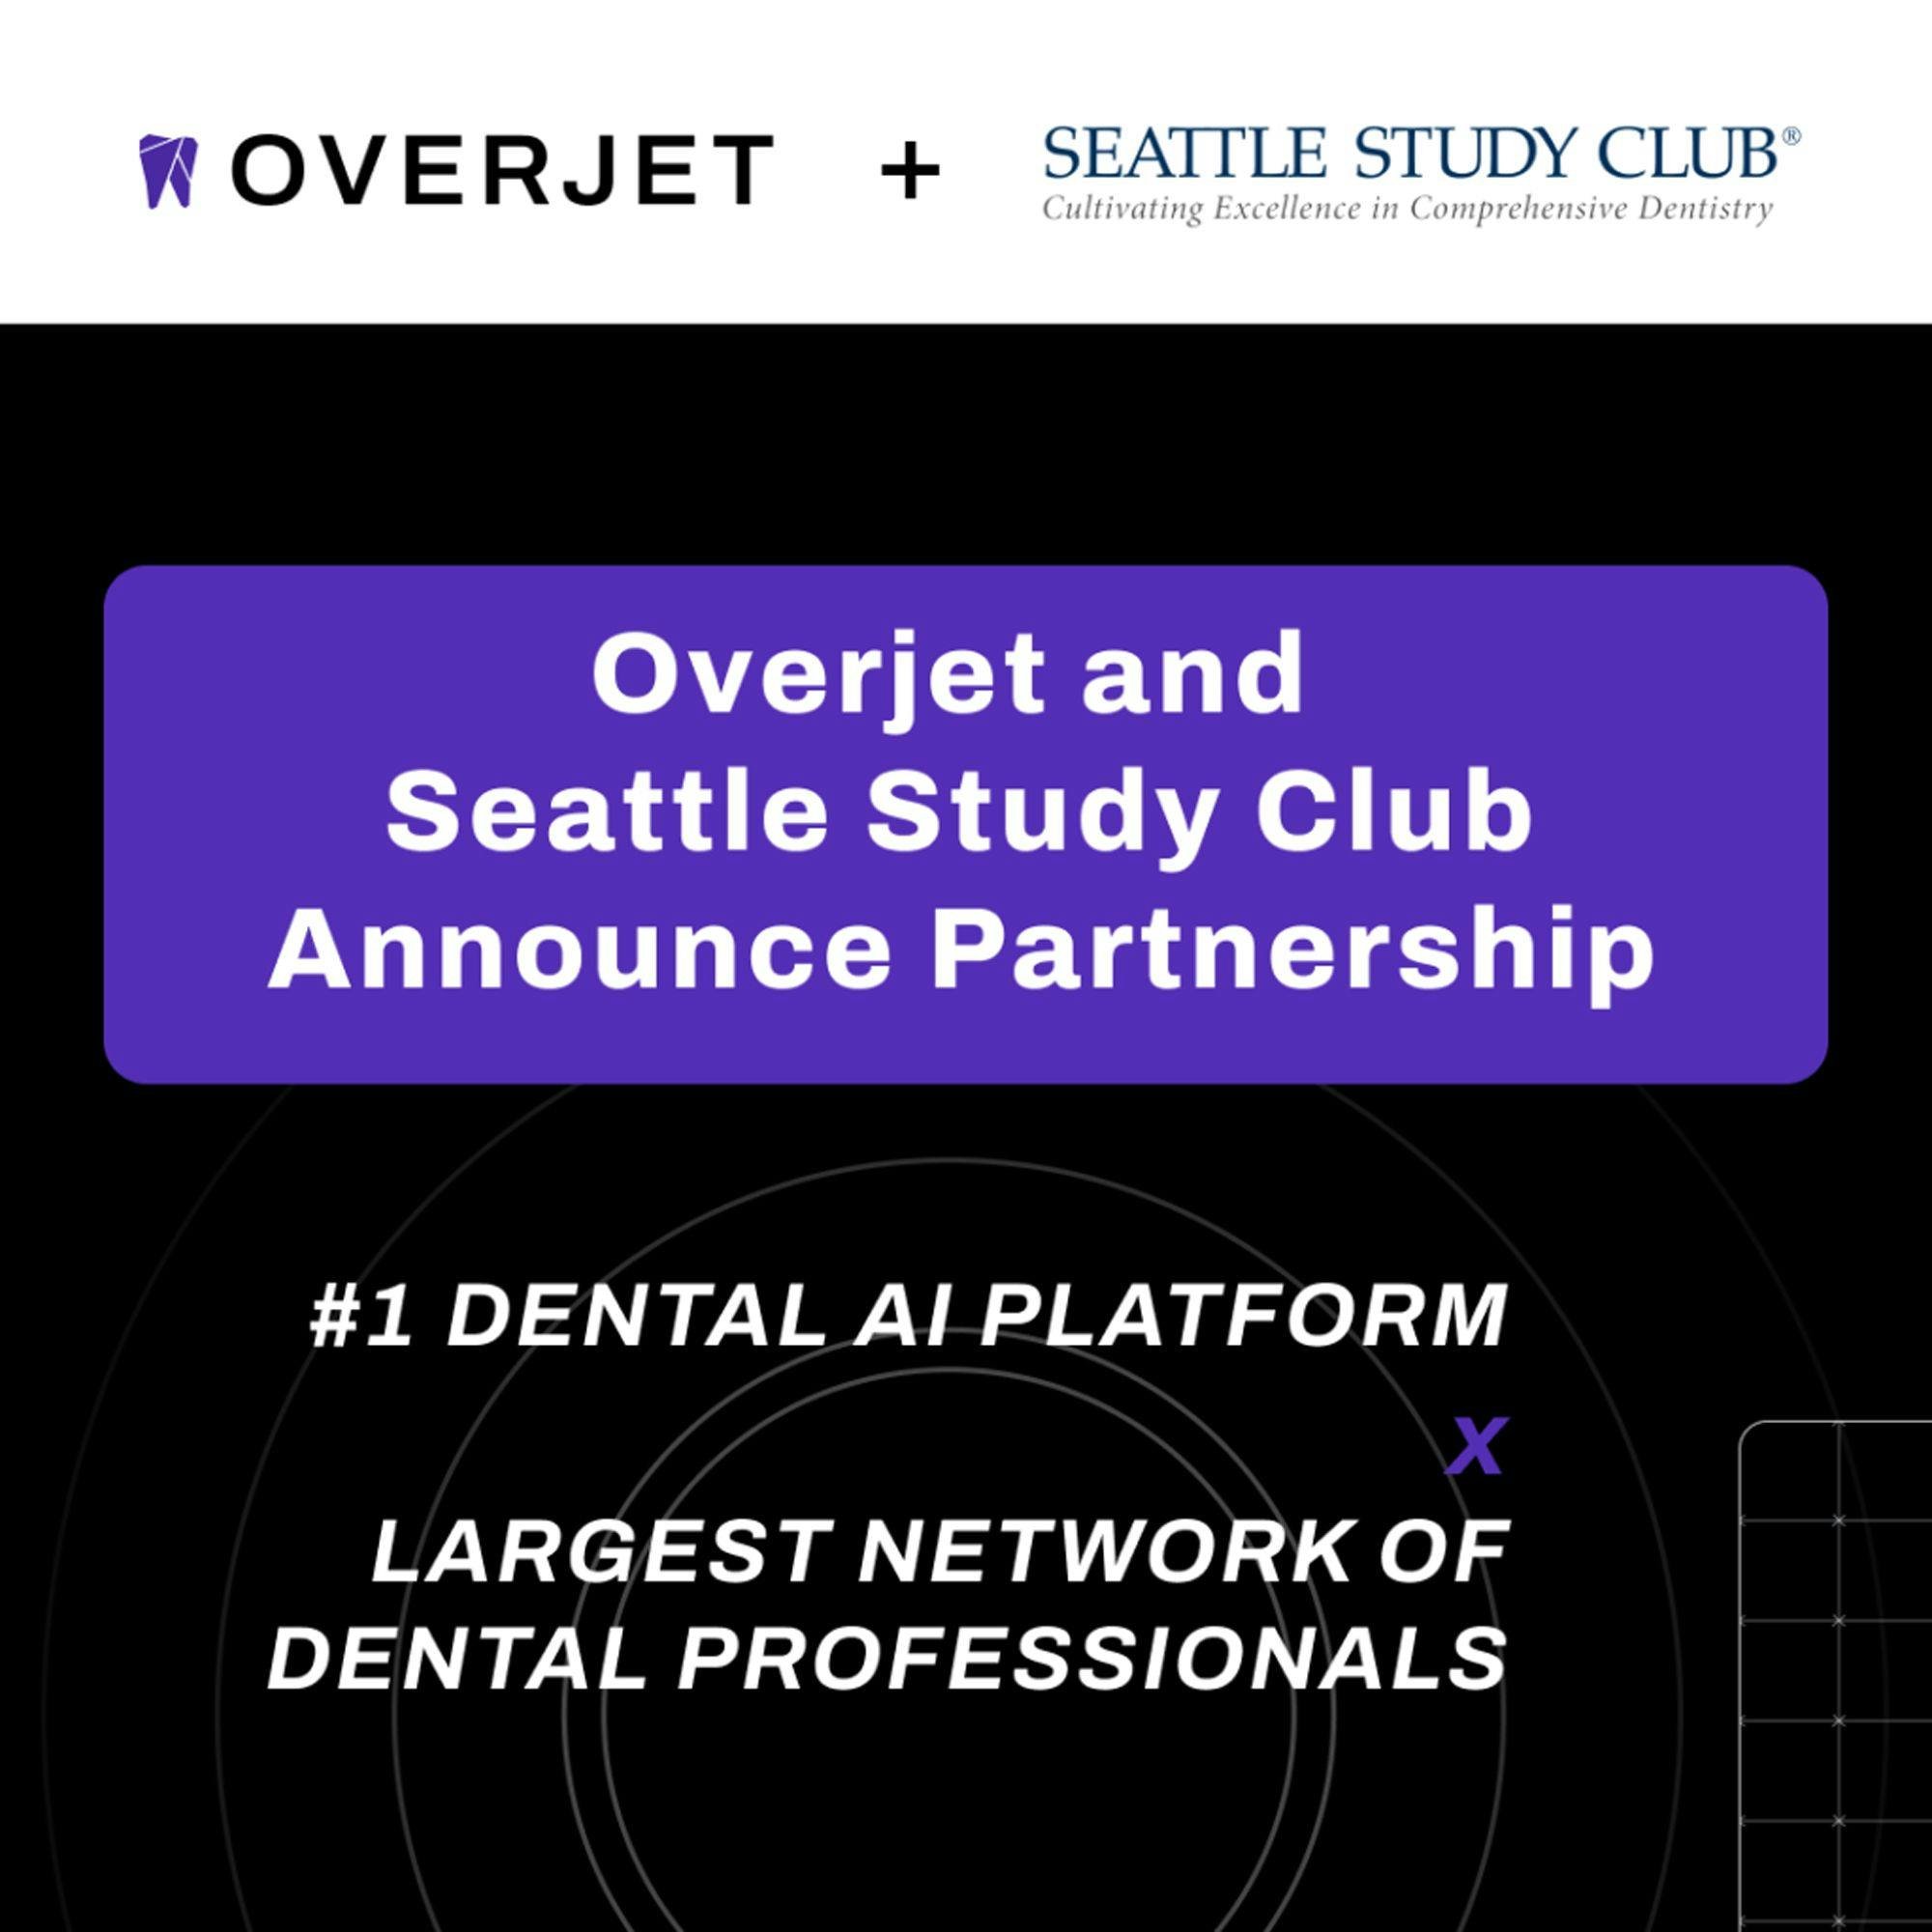 Overjet Announces Partnership with Seattle Study Club